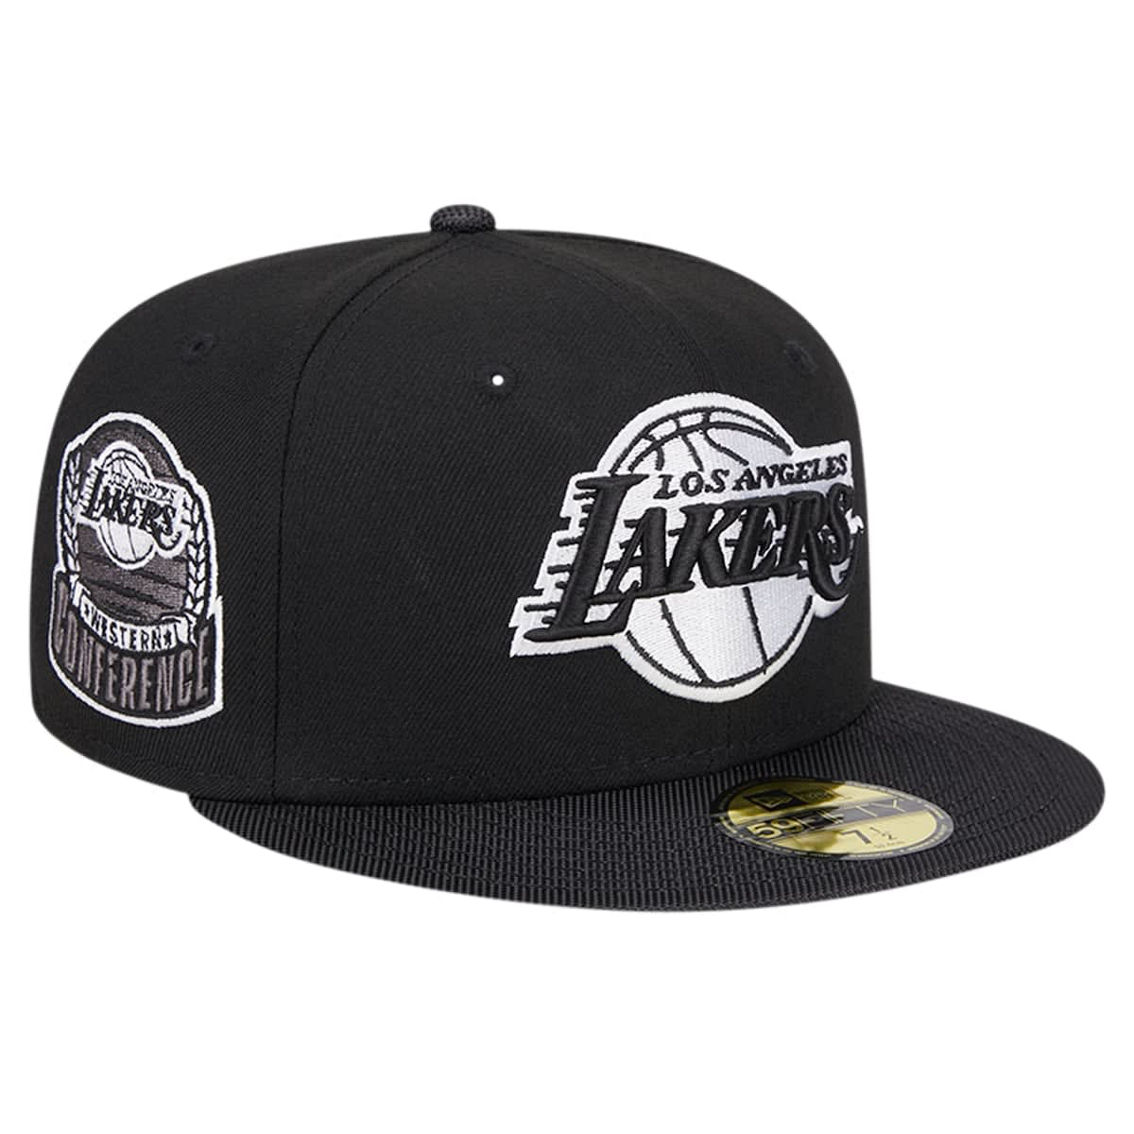 New Era Men's Black Los Angeles Lakers Active Satin Visor 59FIFTY Fitted Hat - Image 2 of 4